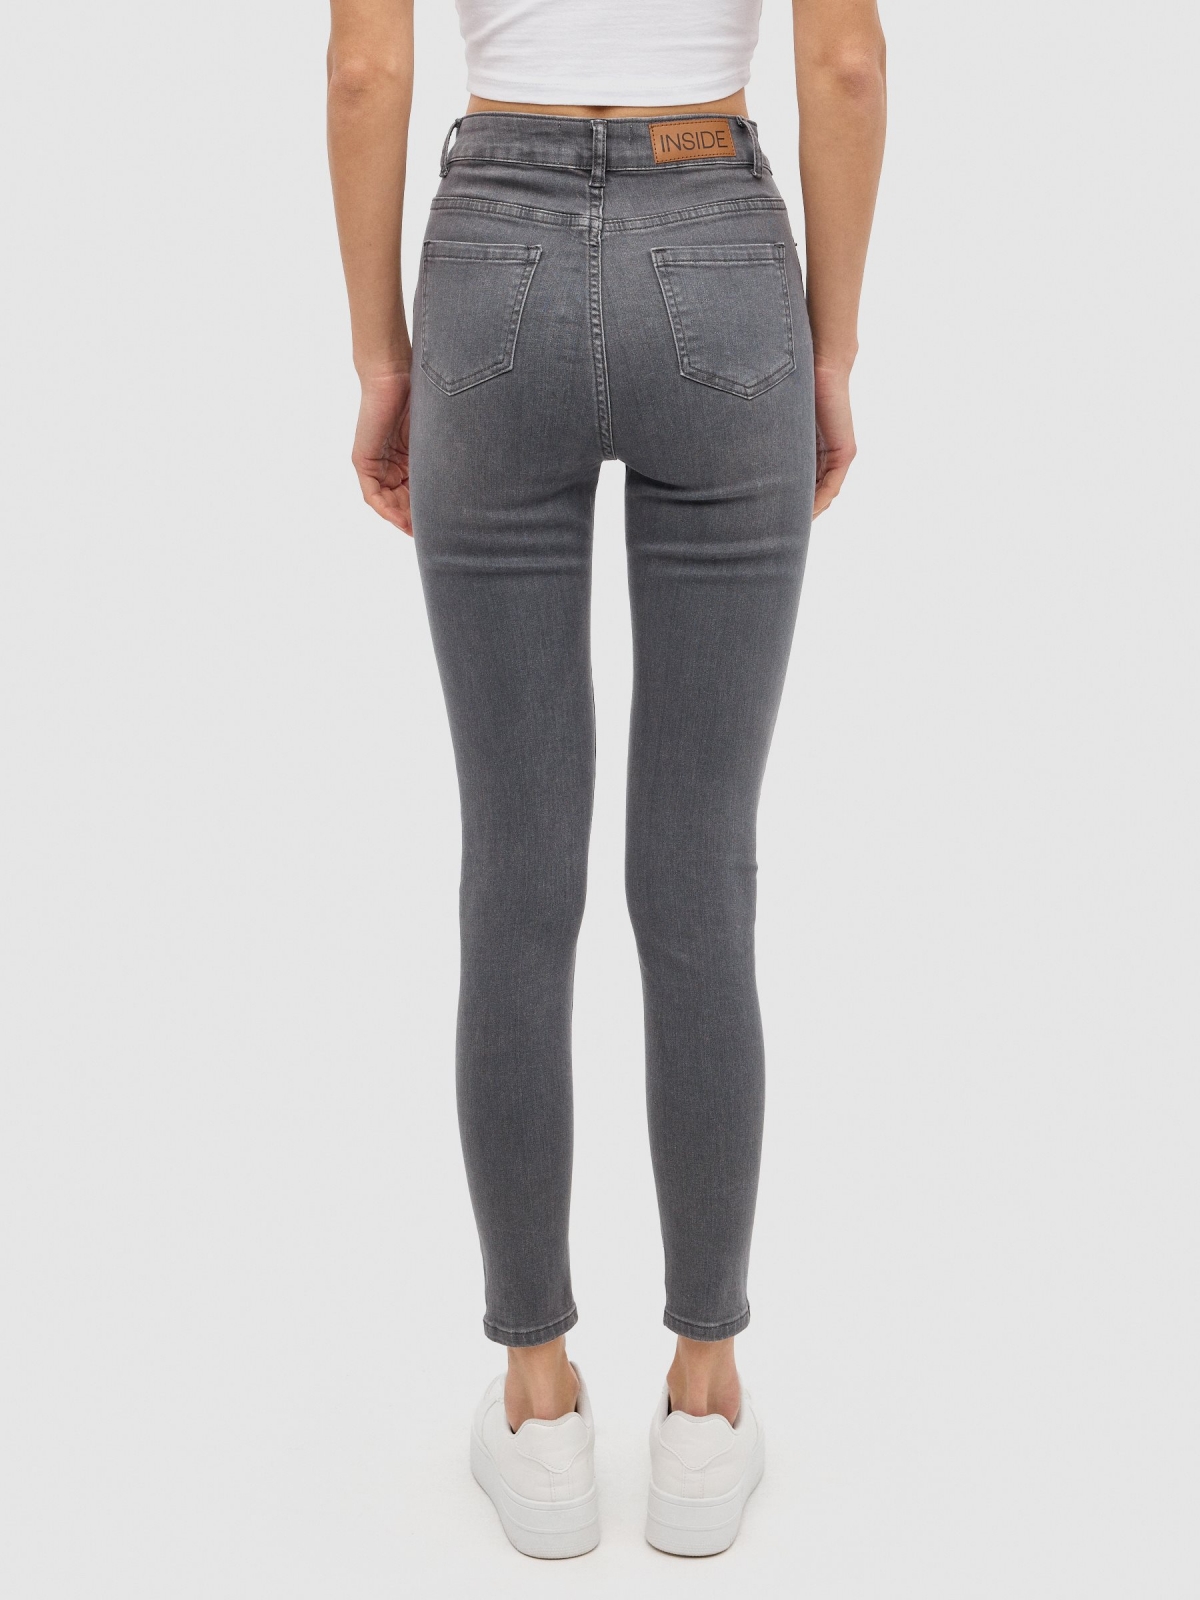 Grey mid-rise jeans light grey middle back view